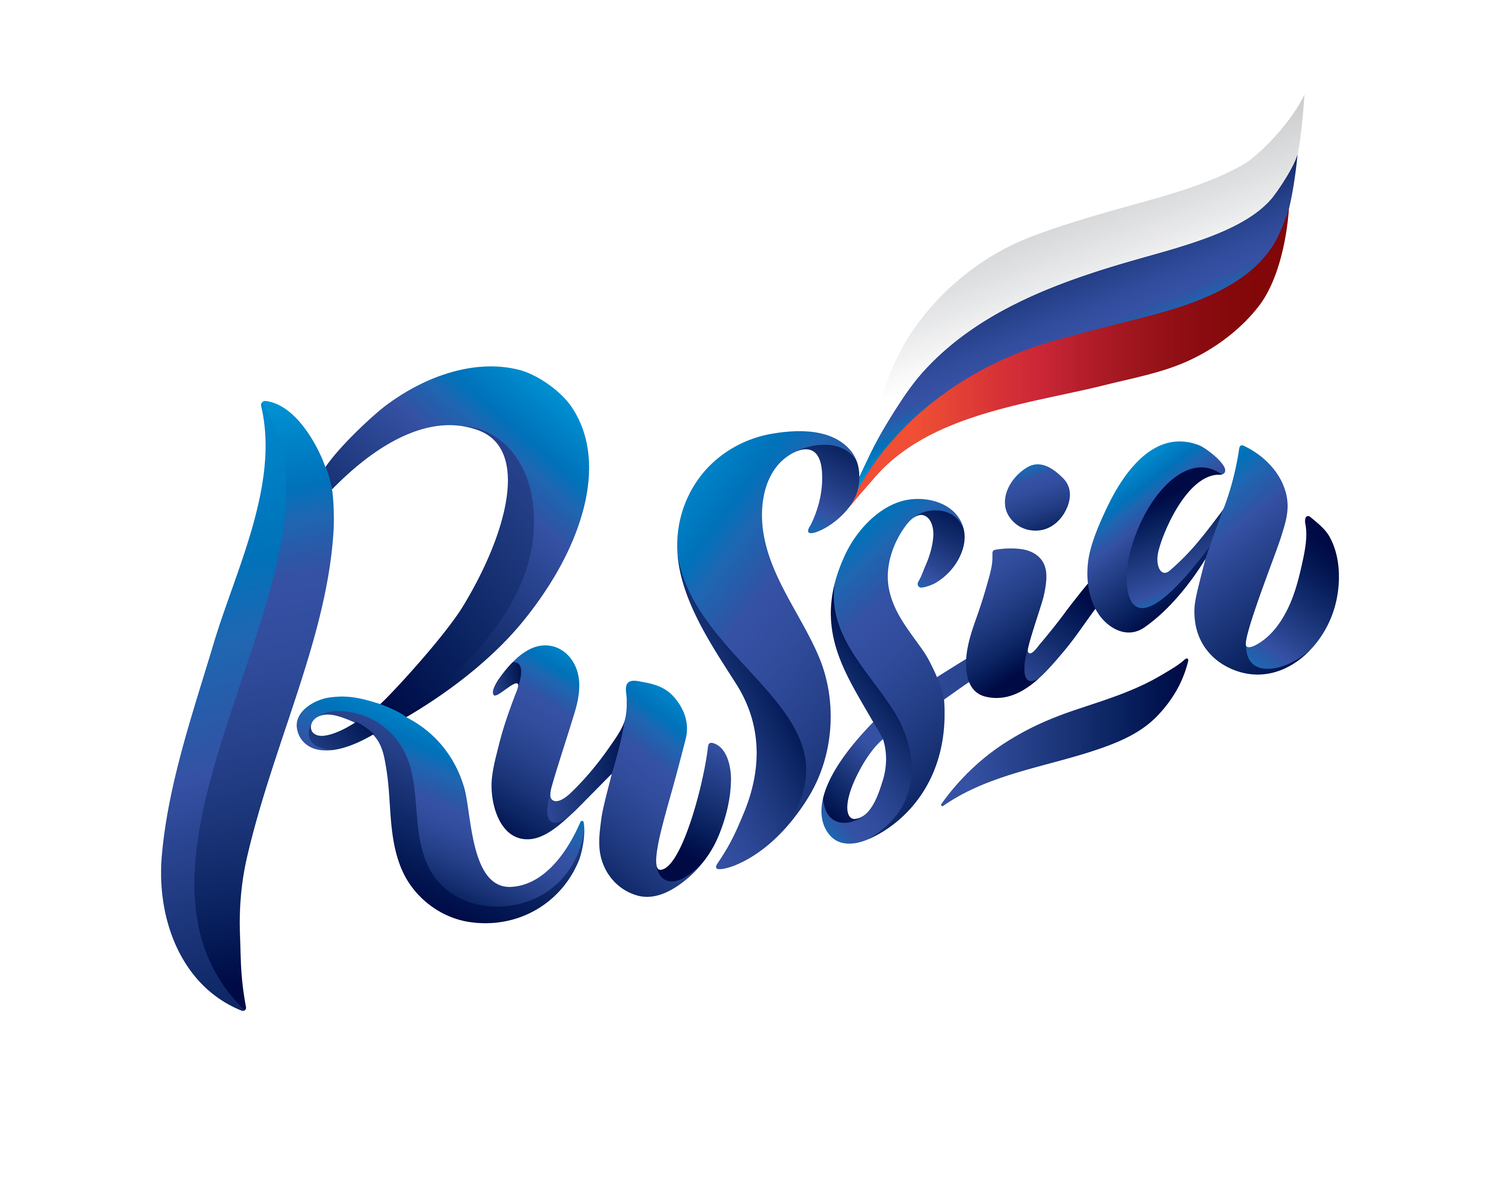 Vector logo of Russia, made in lettering calligraphy style by Irina